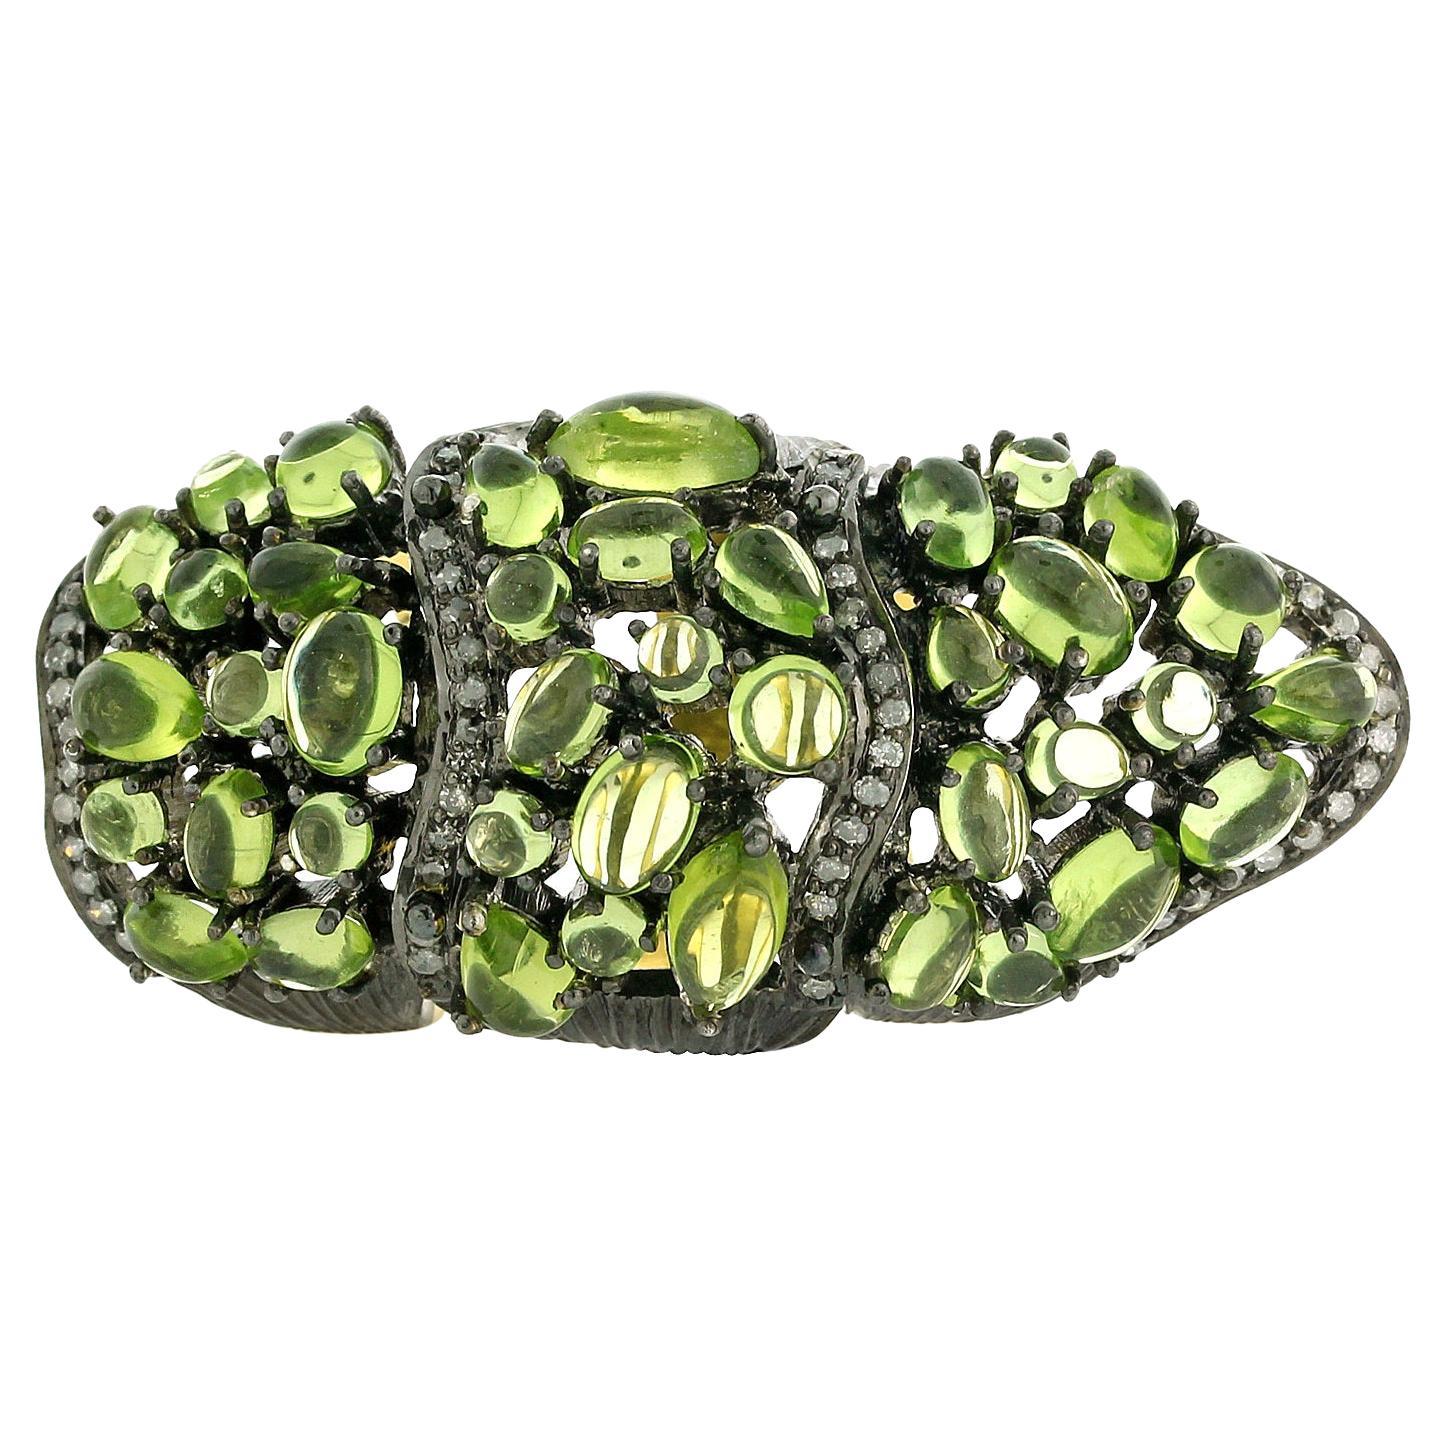 Uneven Shaped Peridot & Pave Diamonds Long Ring Made in 18k Gold & Silver For Sale